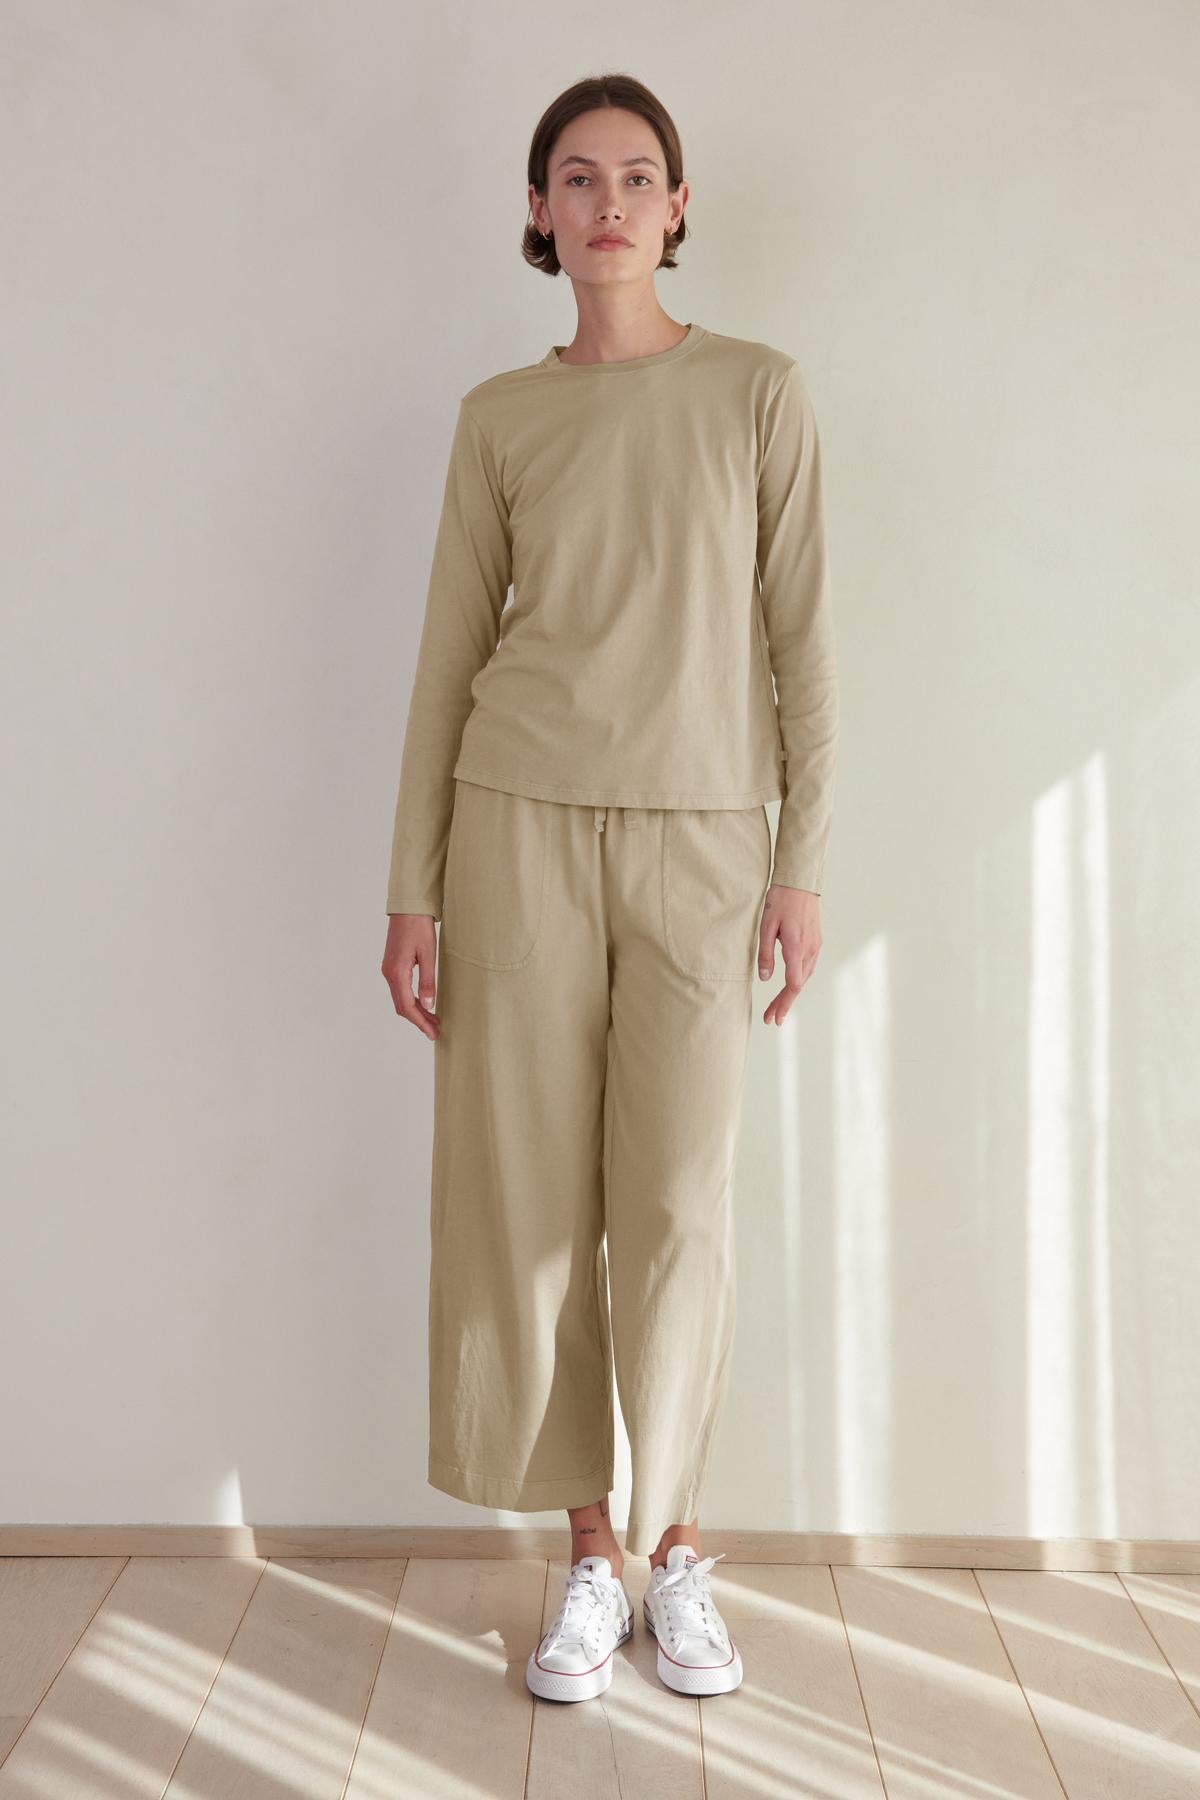 Woman standing in a room wearing an organic cotton beige long-sleeve top and matching Velvet by Jenny Graham PISMO PANT with white sneakers.-36463776432321